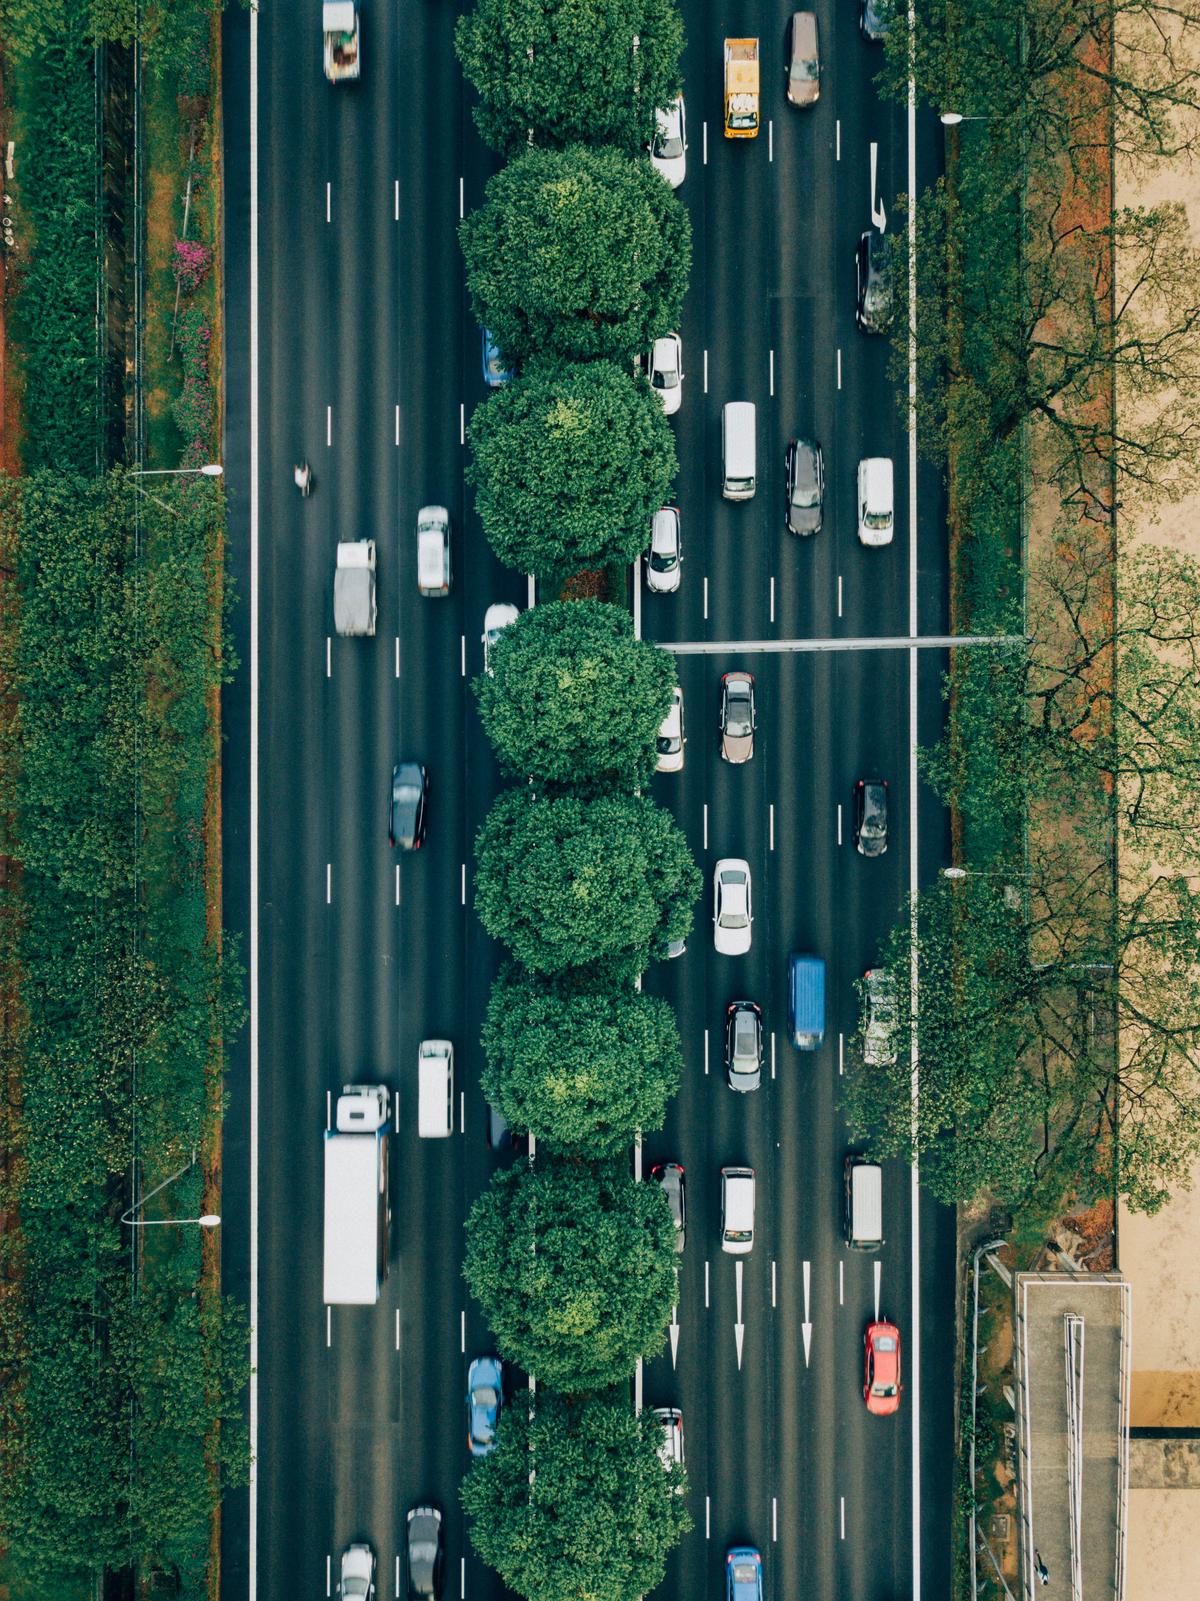 Illustration of horizontal and vertical autoscaling. The image shows a highway with multiple lanes representing horizontal autoscaling, and the widening of lanes representing vertical autoscaling.